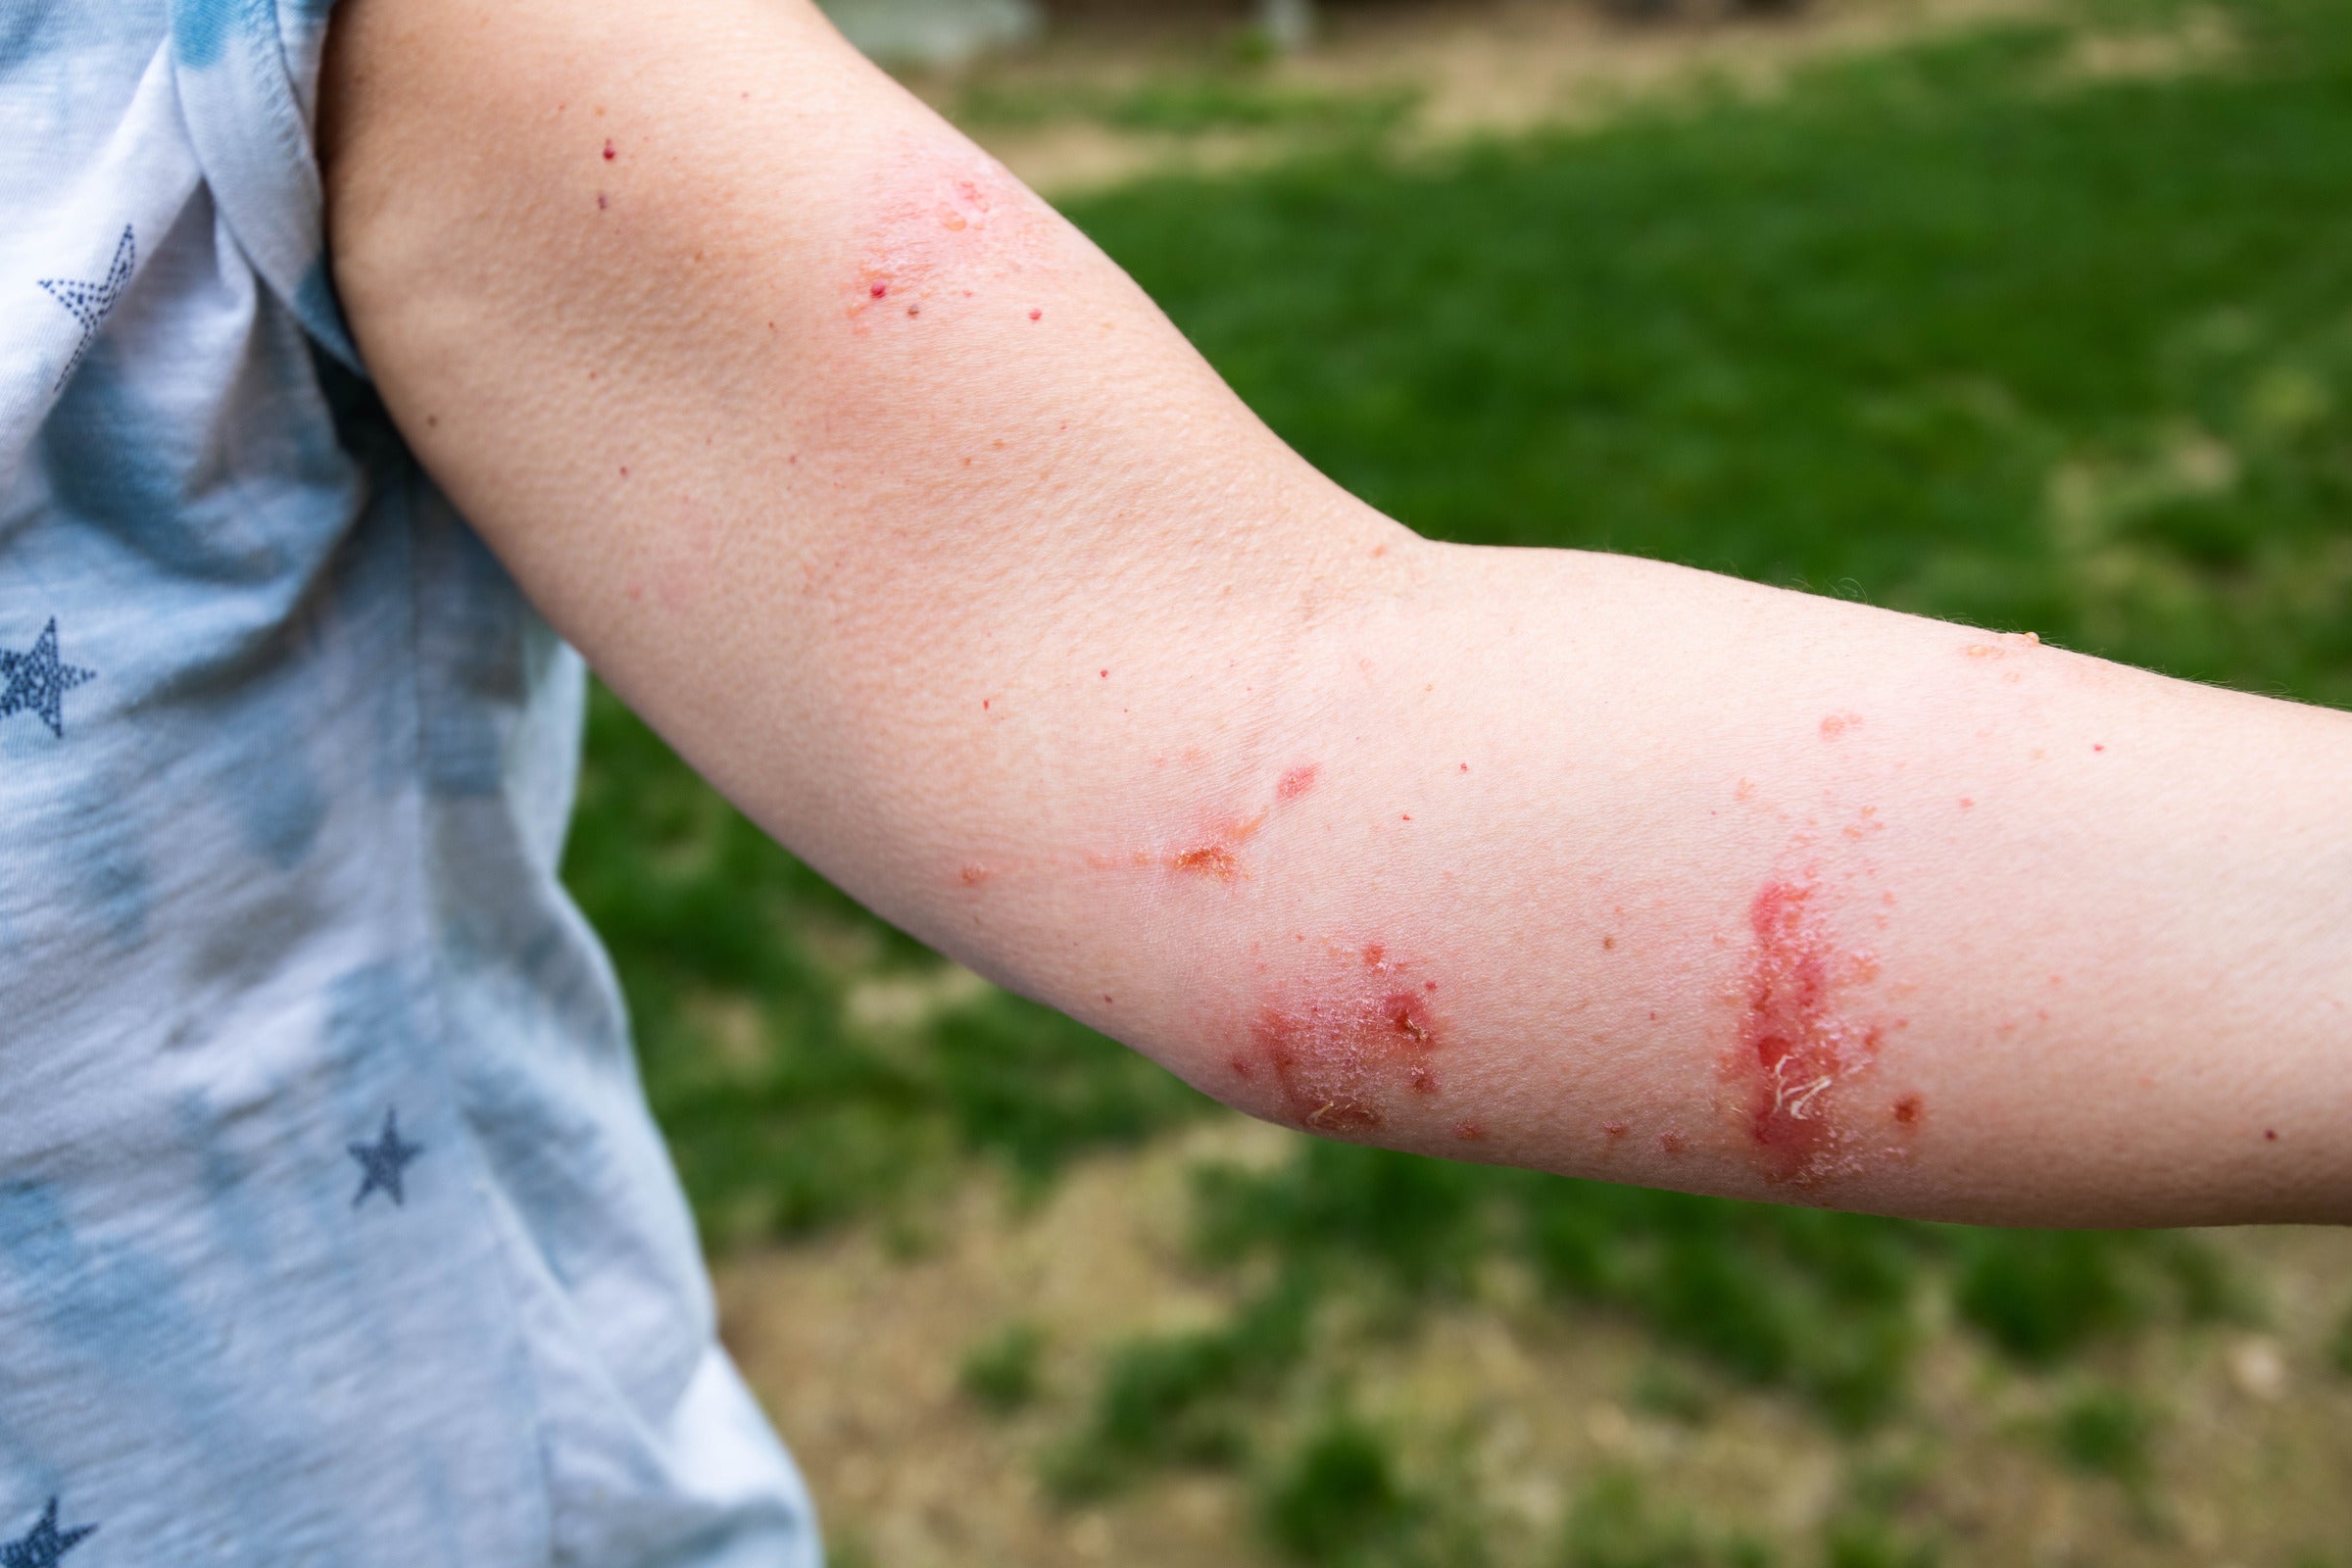 Rashes and blisters caused by plants: 5 common culprits